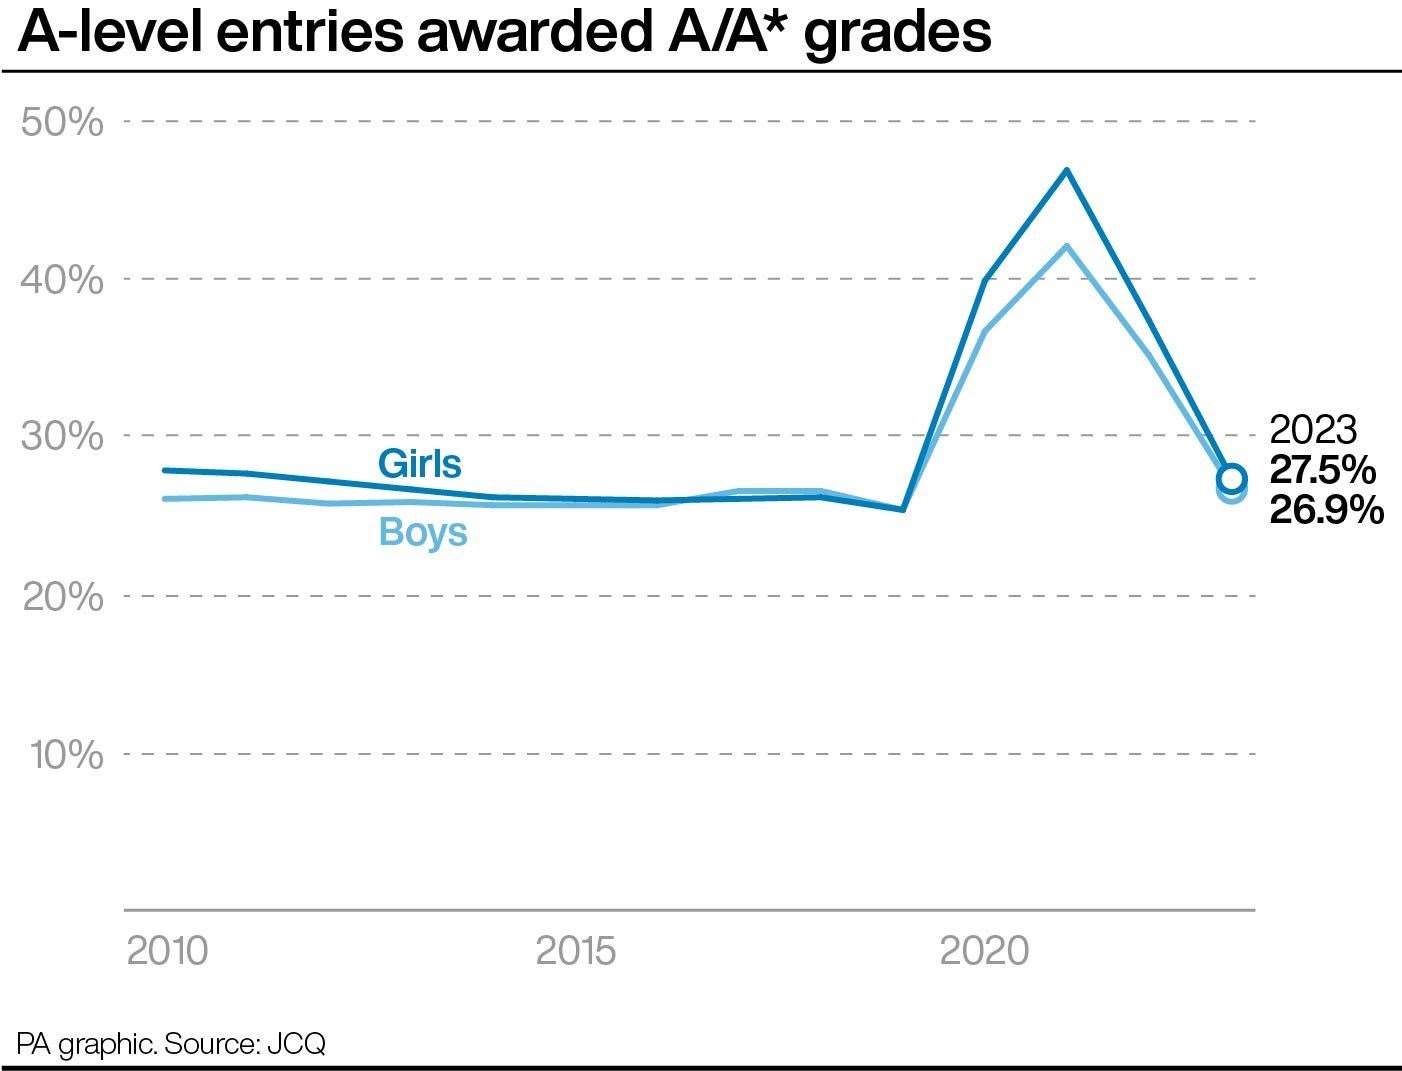 A-level entries awarded (PA Graphics)